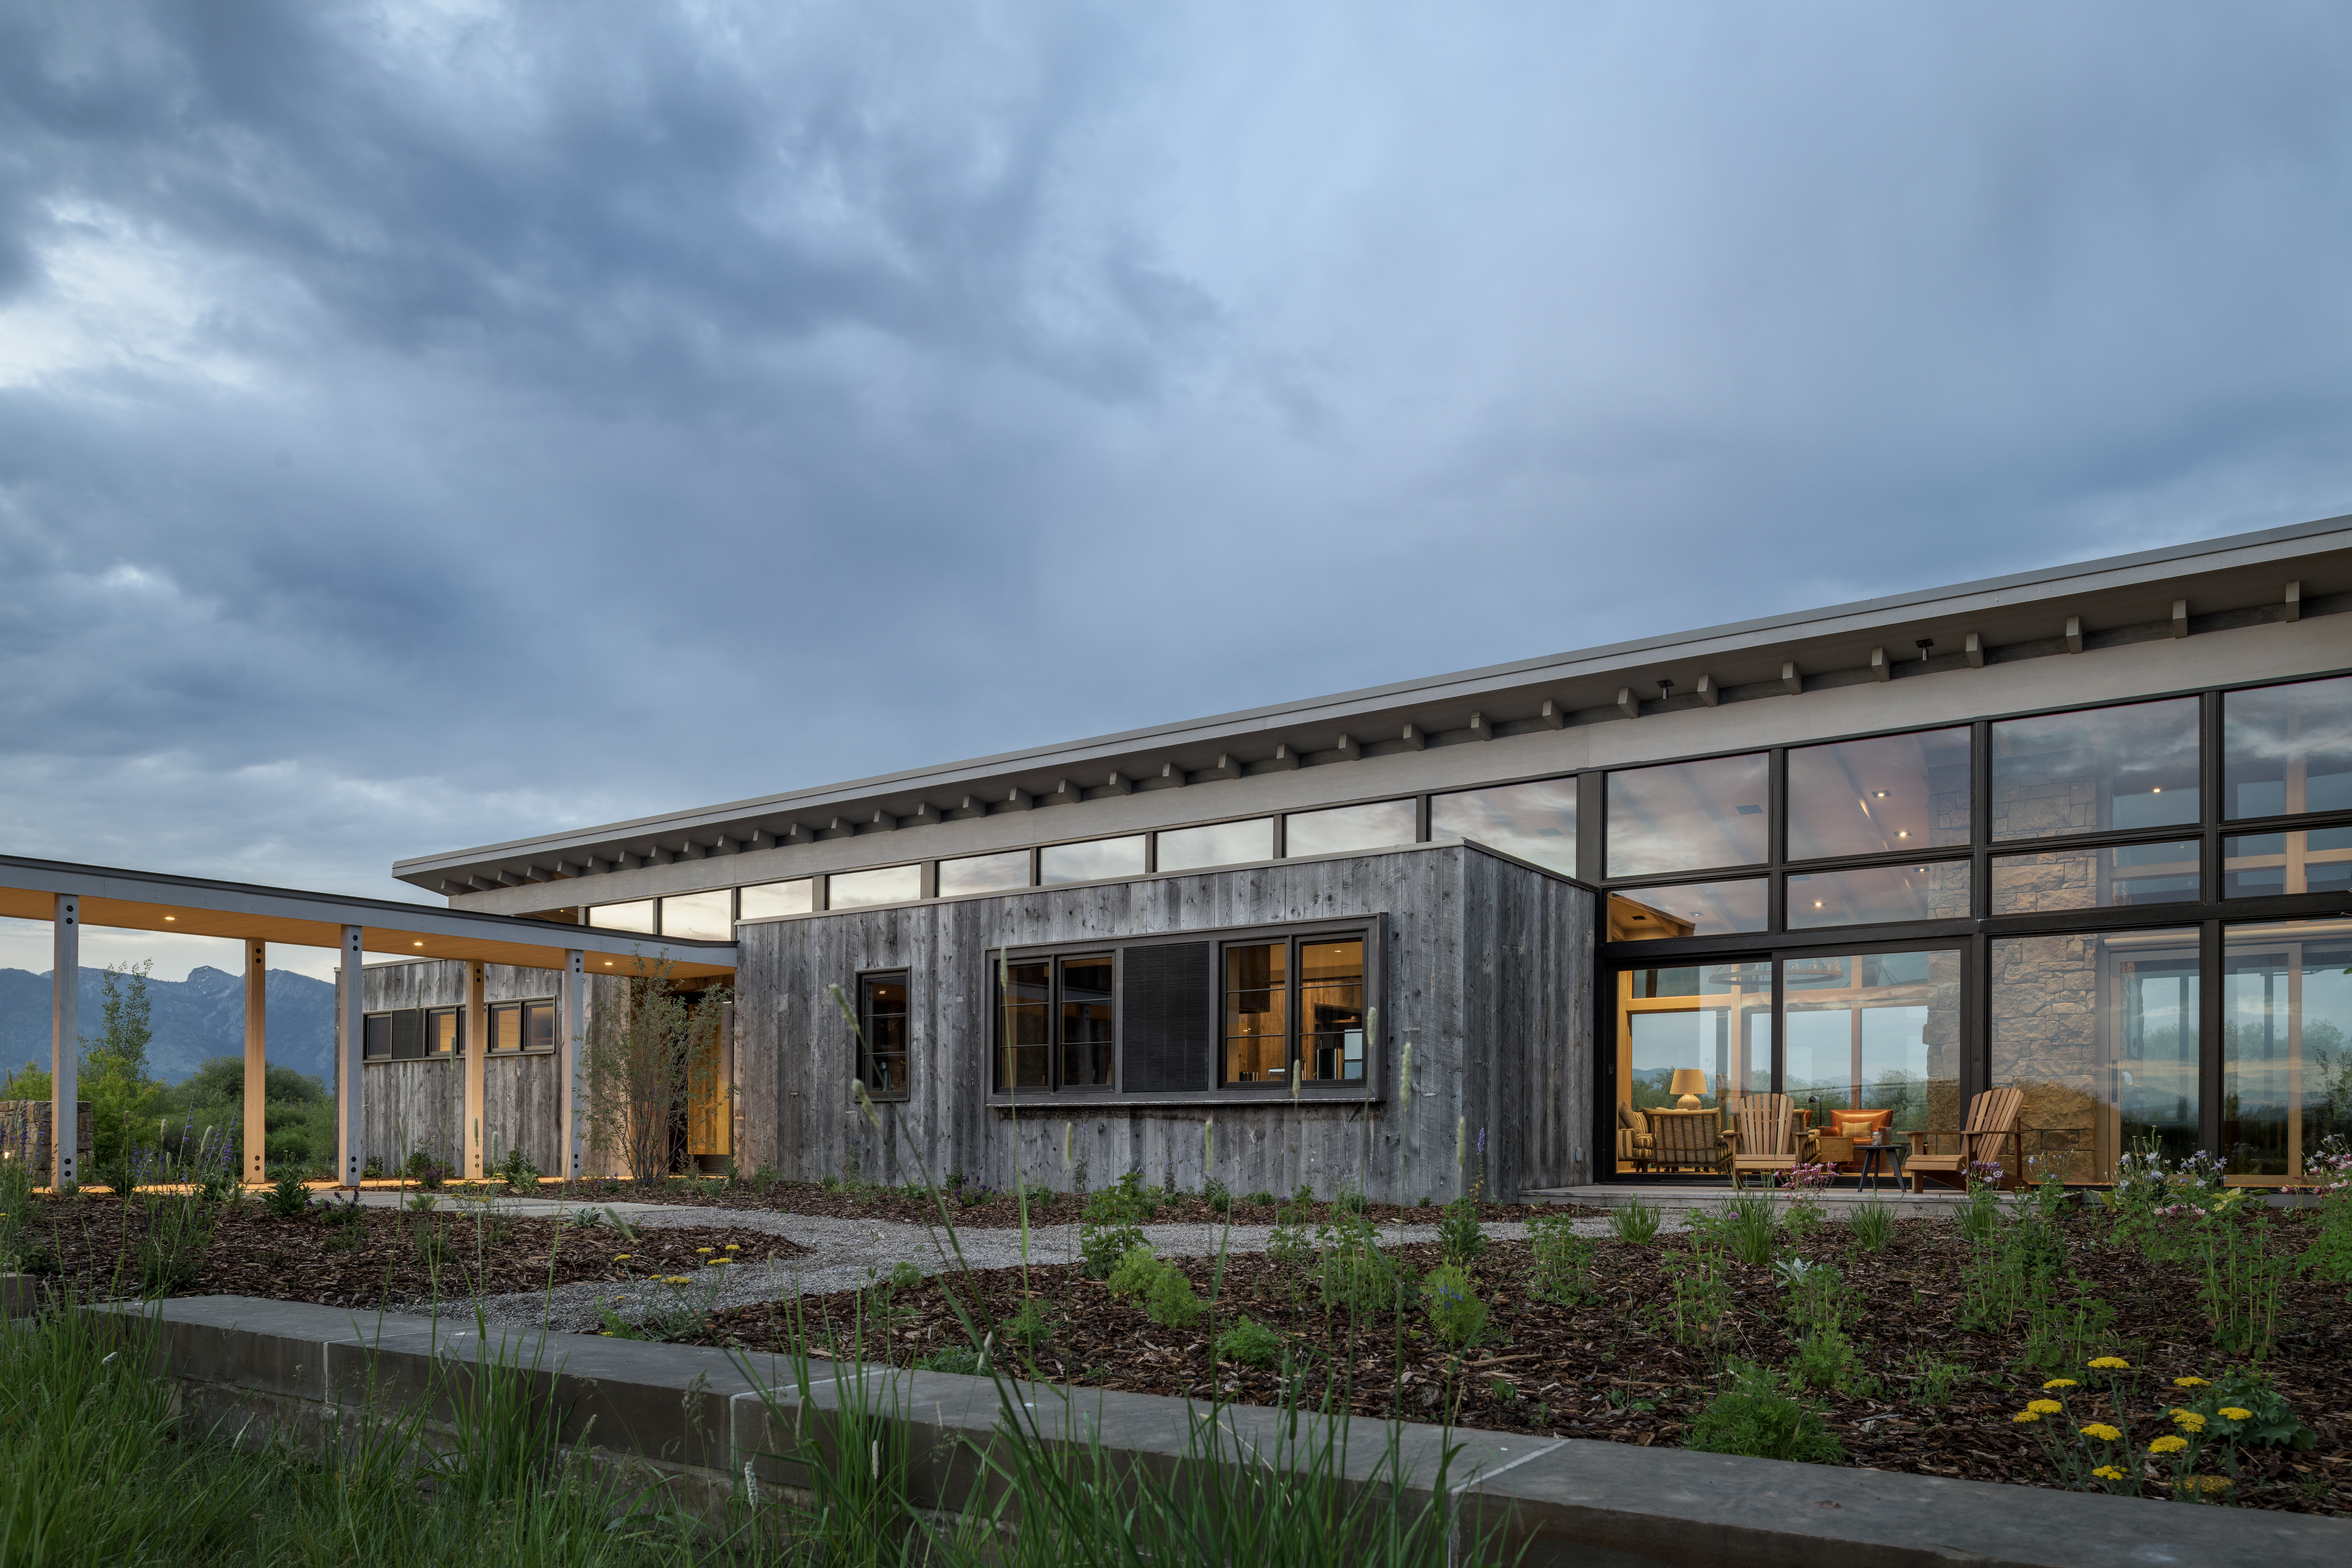 Alternate view of Wyoming Retreat's entry, highlighting the expansive windows and an outdoor seating area for enjoying pleasant weather